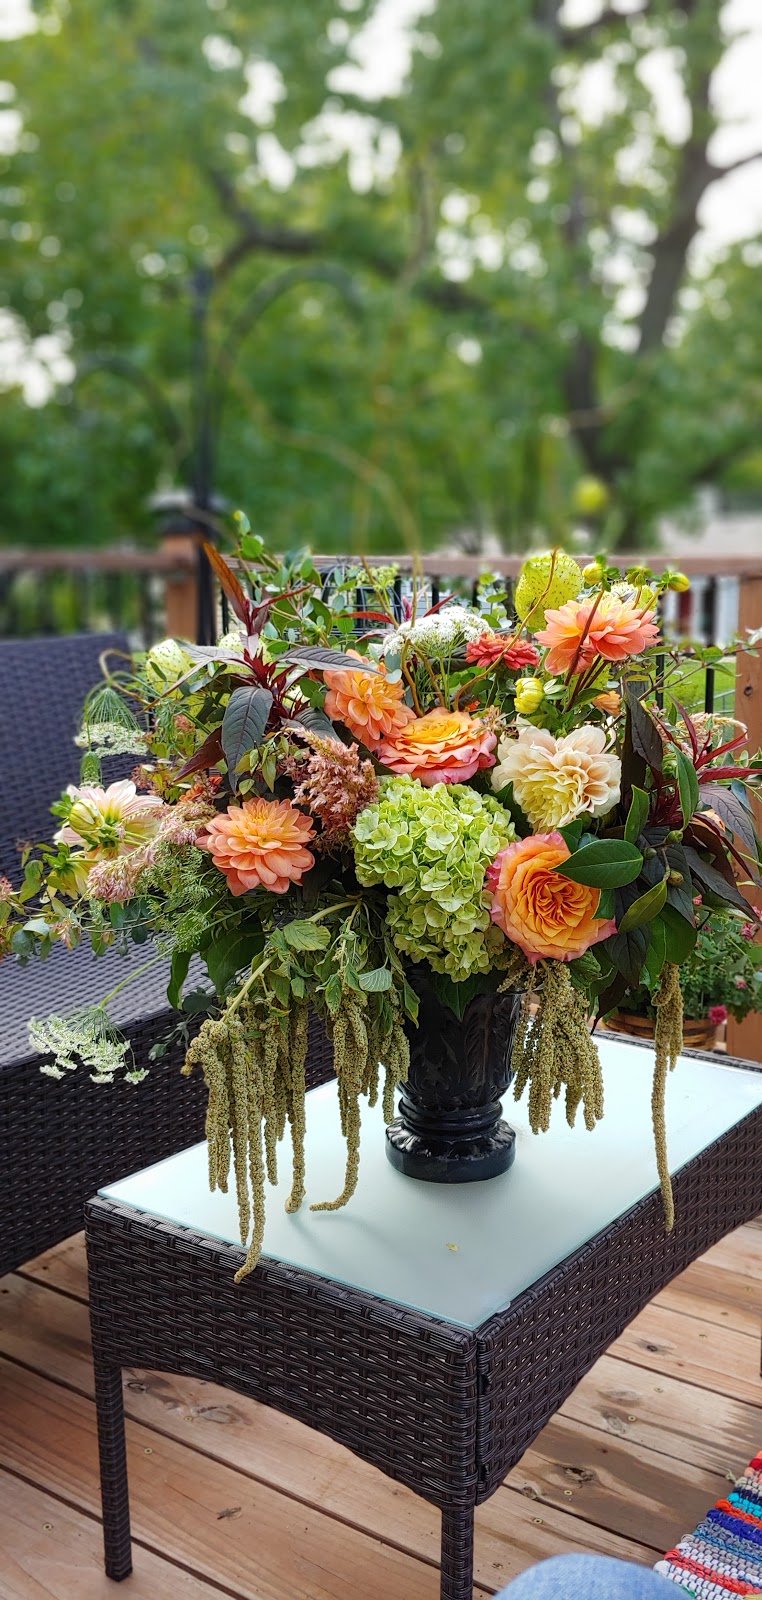 Eden Floral and Events | 6901 W 72nd St, Overland Park, KS 66204, USA | Phone: (913) 492-1600